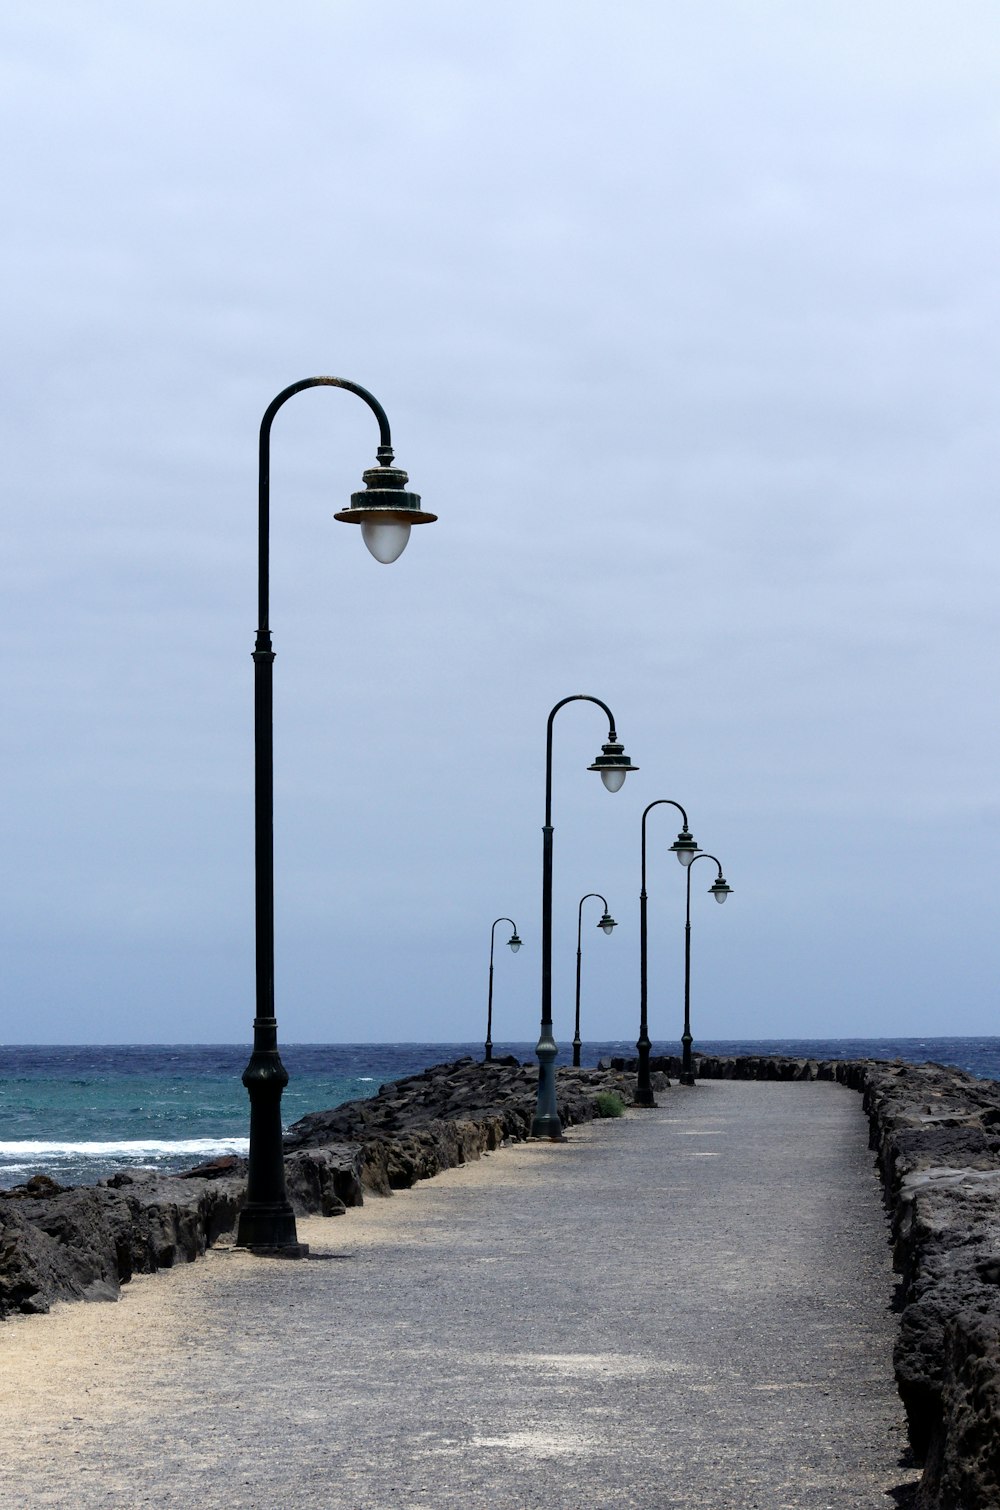 a walkway next to the ocean under a cloudy sky